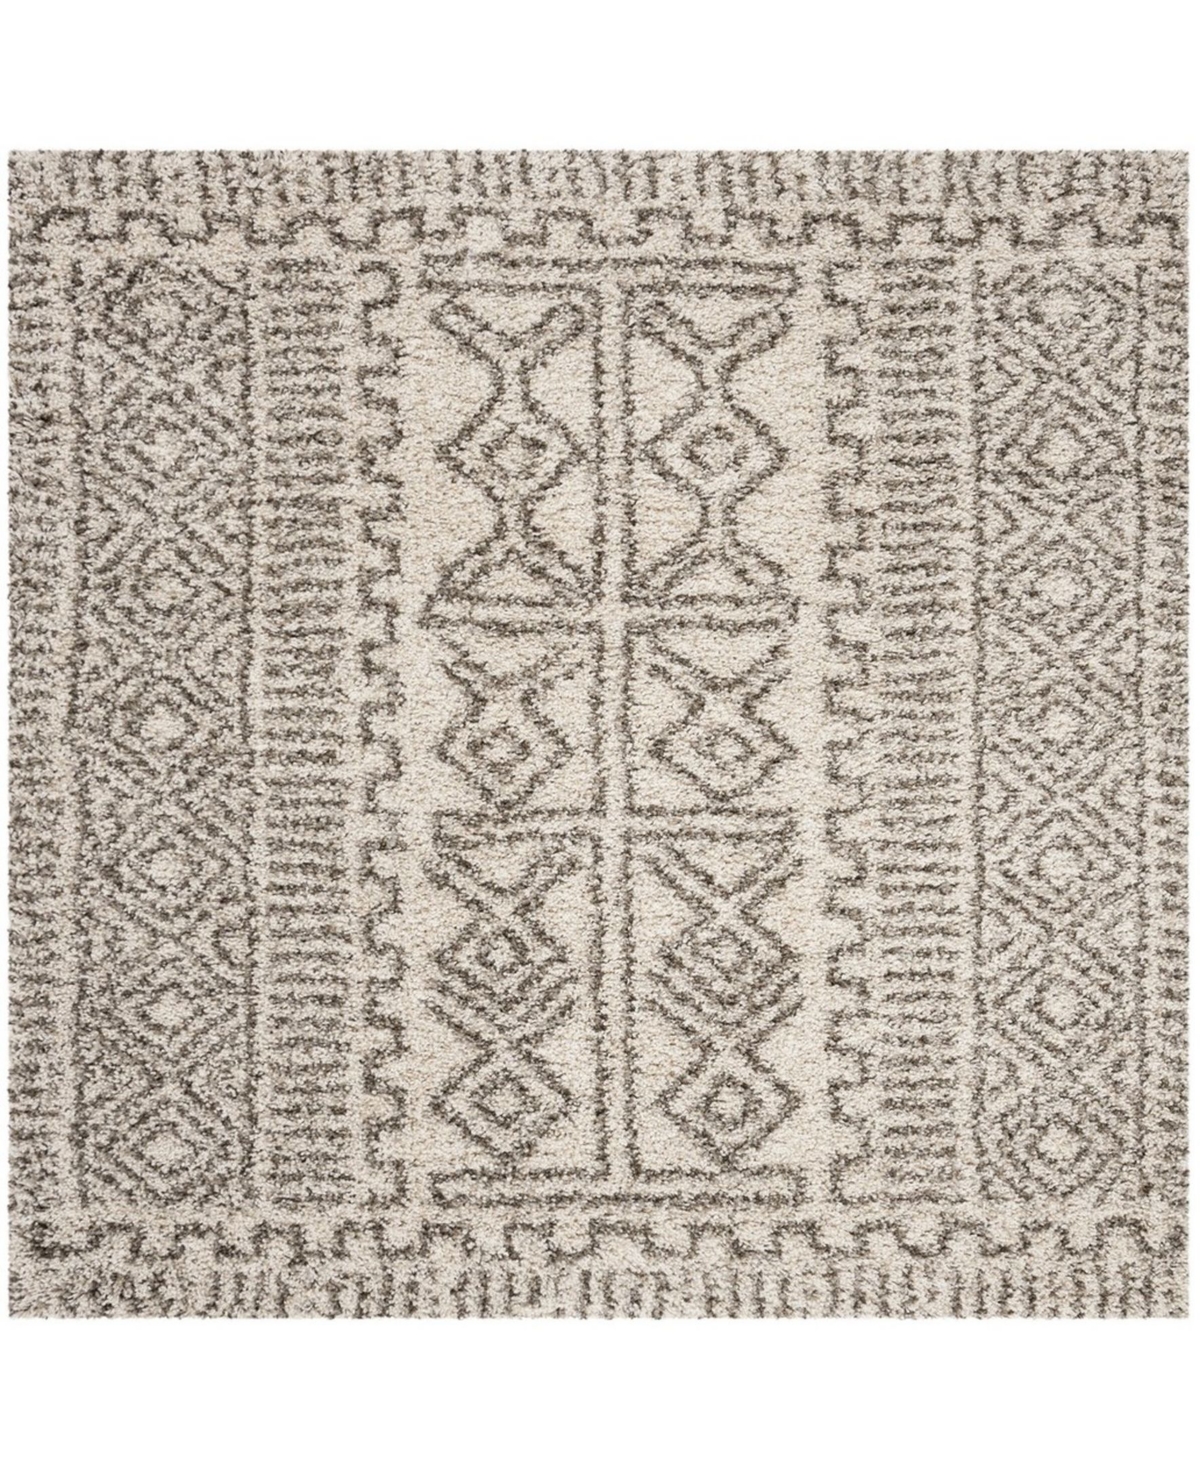 Safavieh Hudson Ivory and Gray 7' x 7' Square Area Rug - Ivory